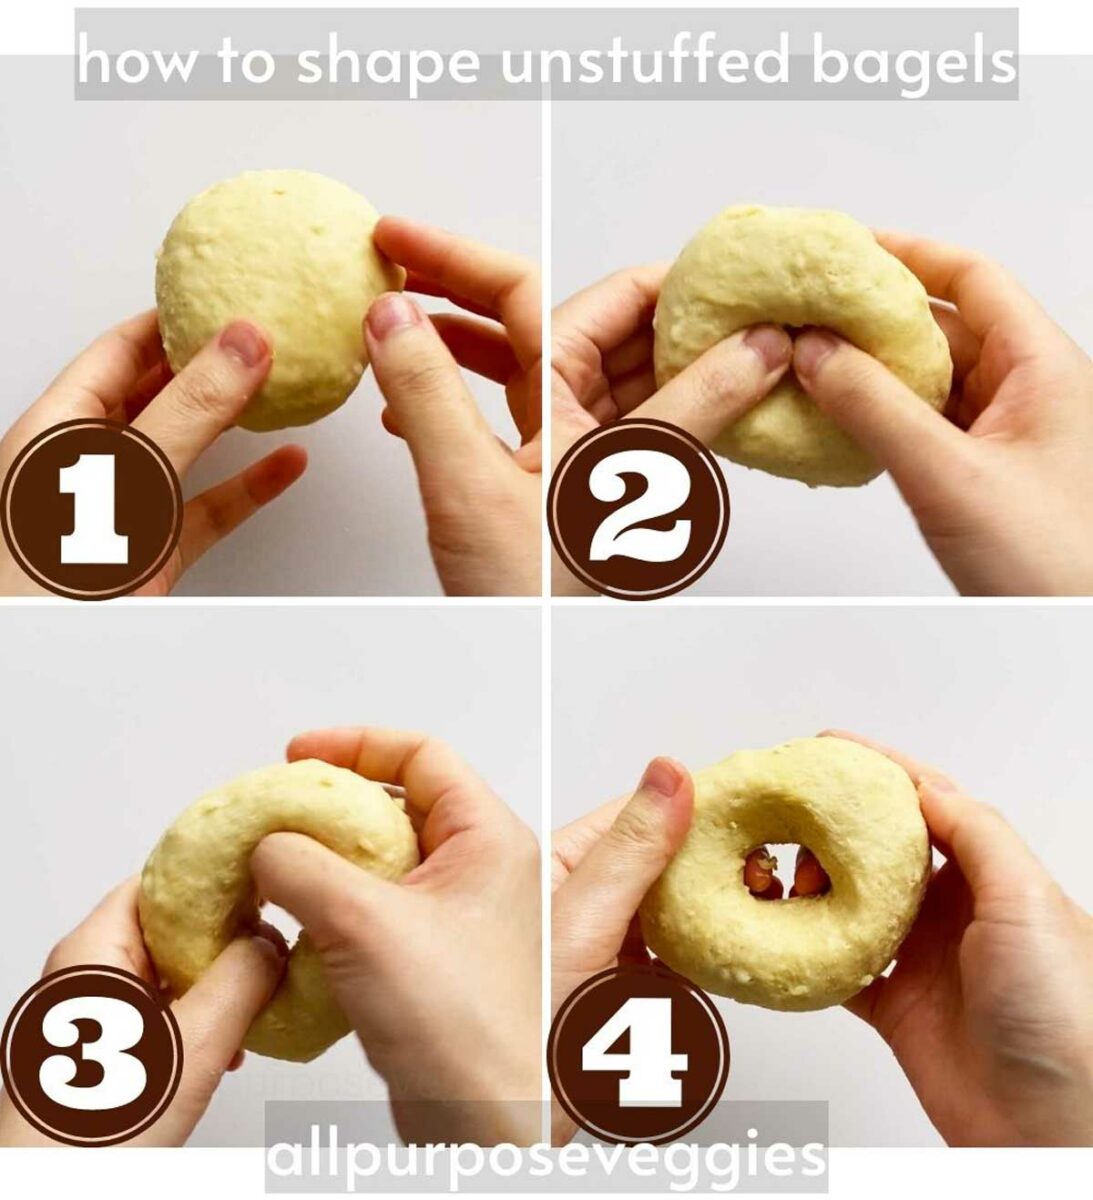 apv - how to shape unstuffed bagels - example